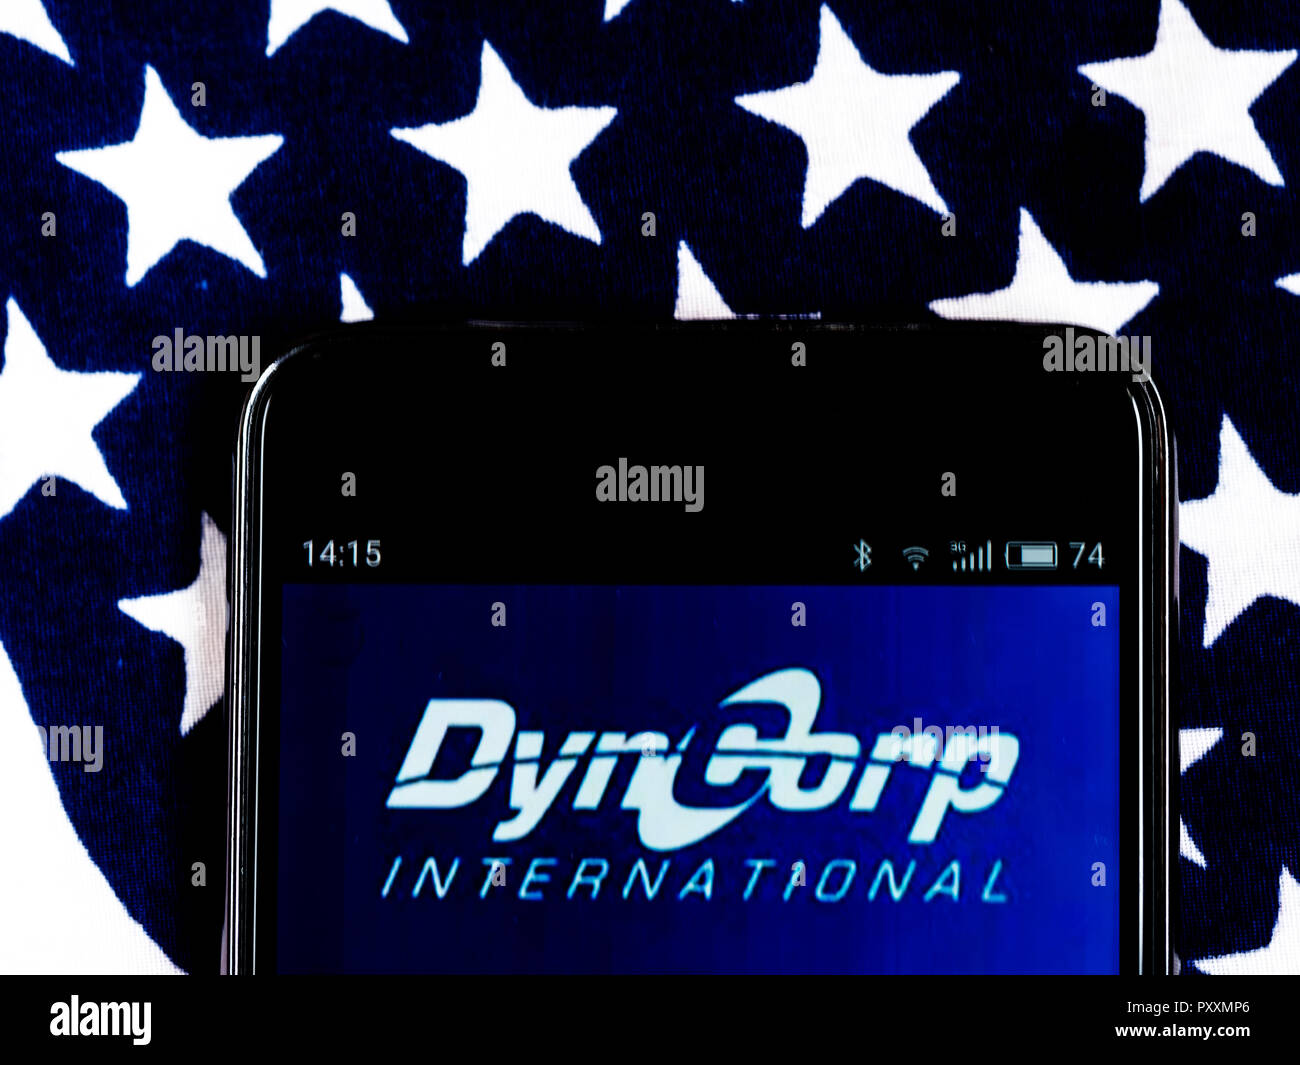 DynCorp Company logo seen displayed on smart phone. DynCorp, most recently DynCorp International, is an American Global service provider. Started as an aviation company, the company also provides flight operations support, training and mentoring, Stock Photo